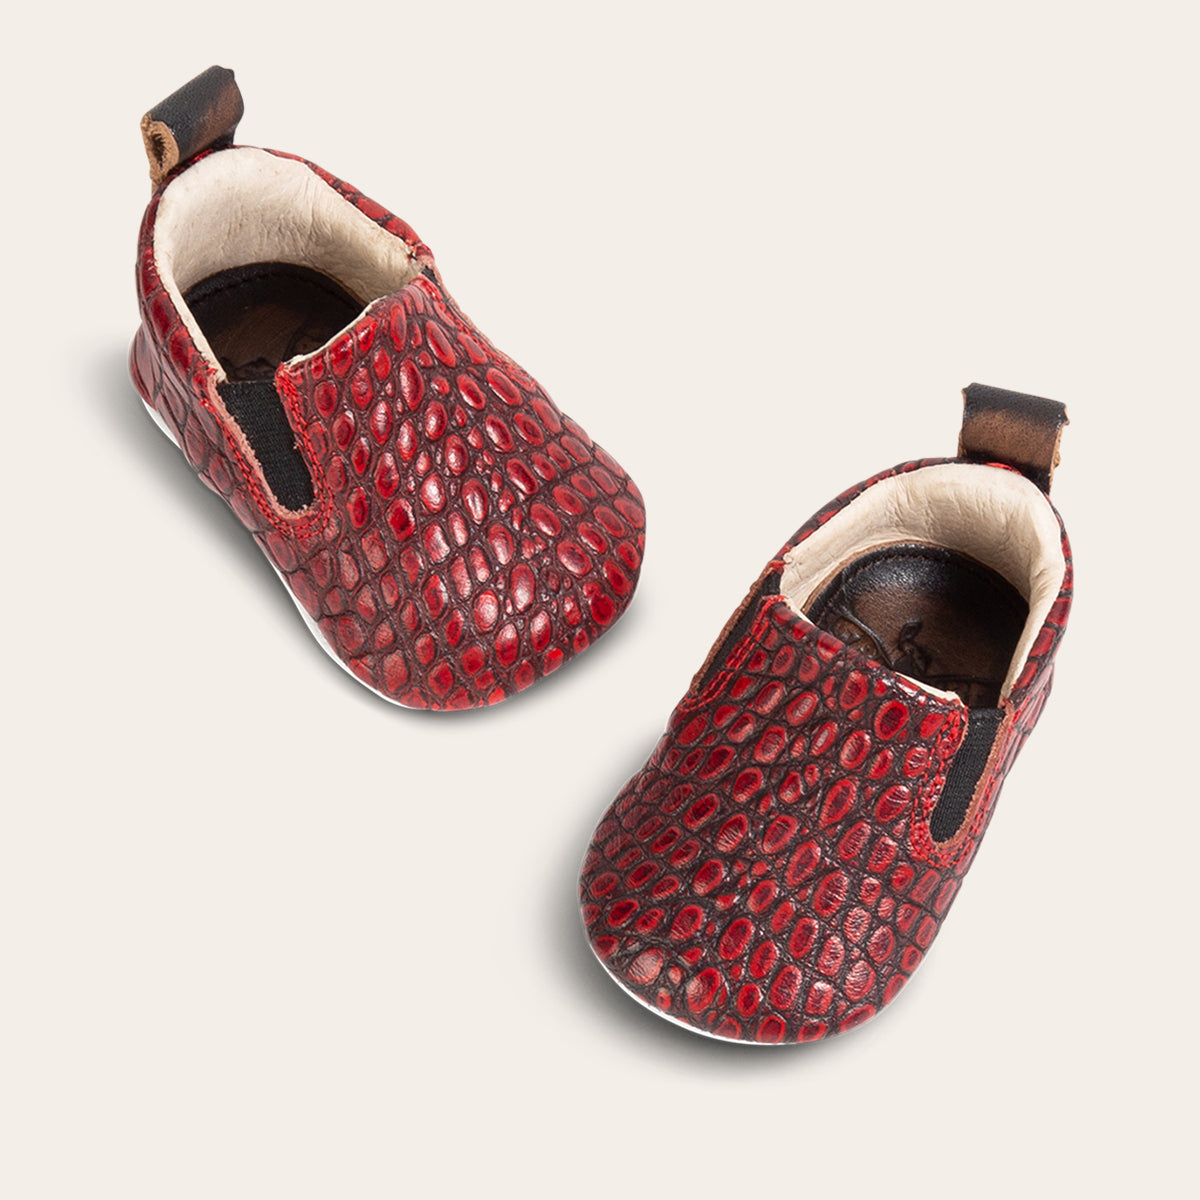 top view showing heel pull tab and side elastic panel on FREEBIRD infant baby kicks red croco leather shoe